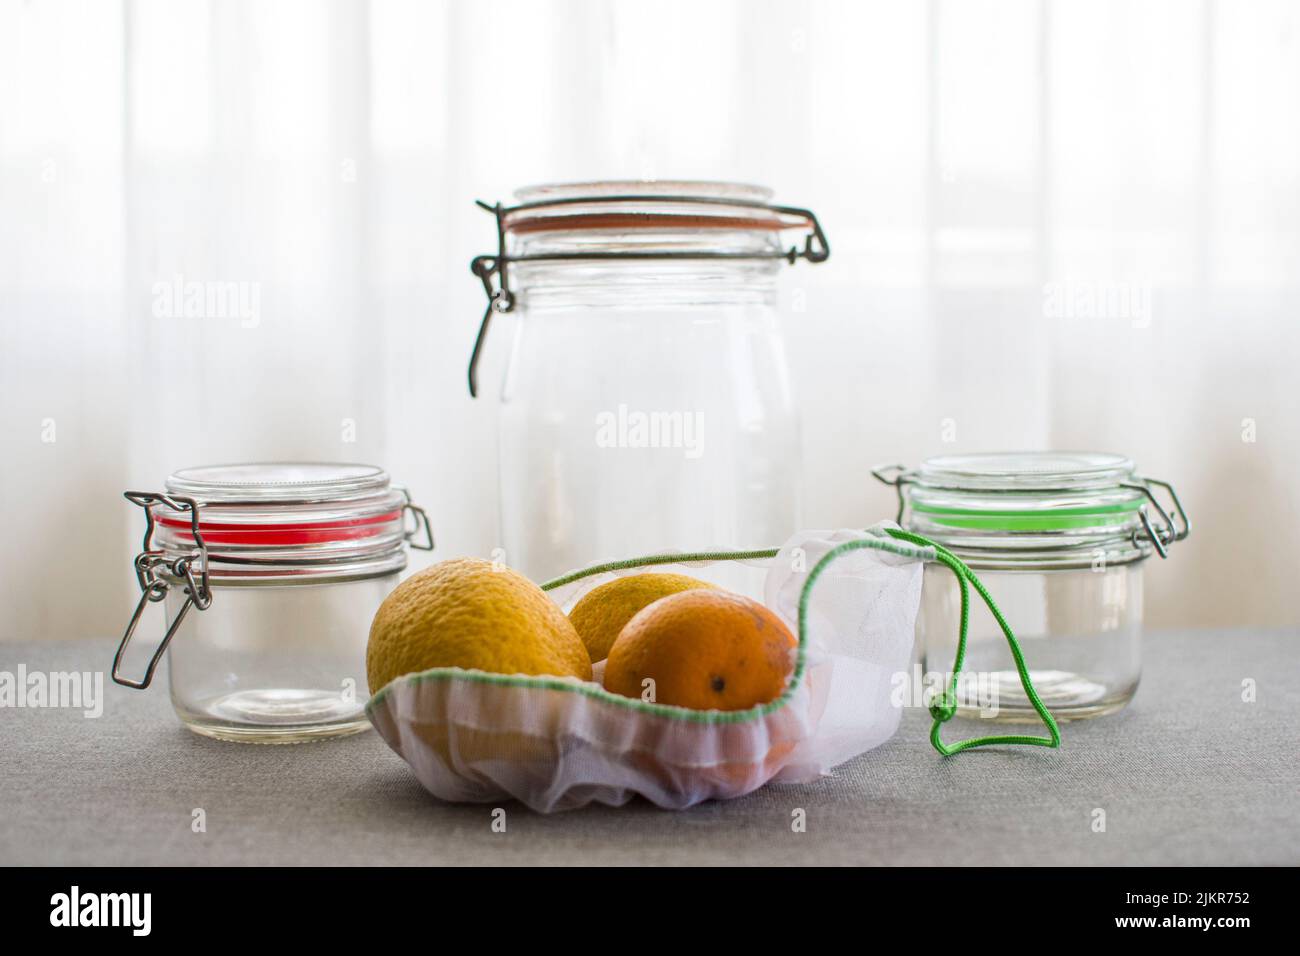 Glass jars and reusable bags for sustainable storage and shopping Stock Photo